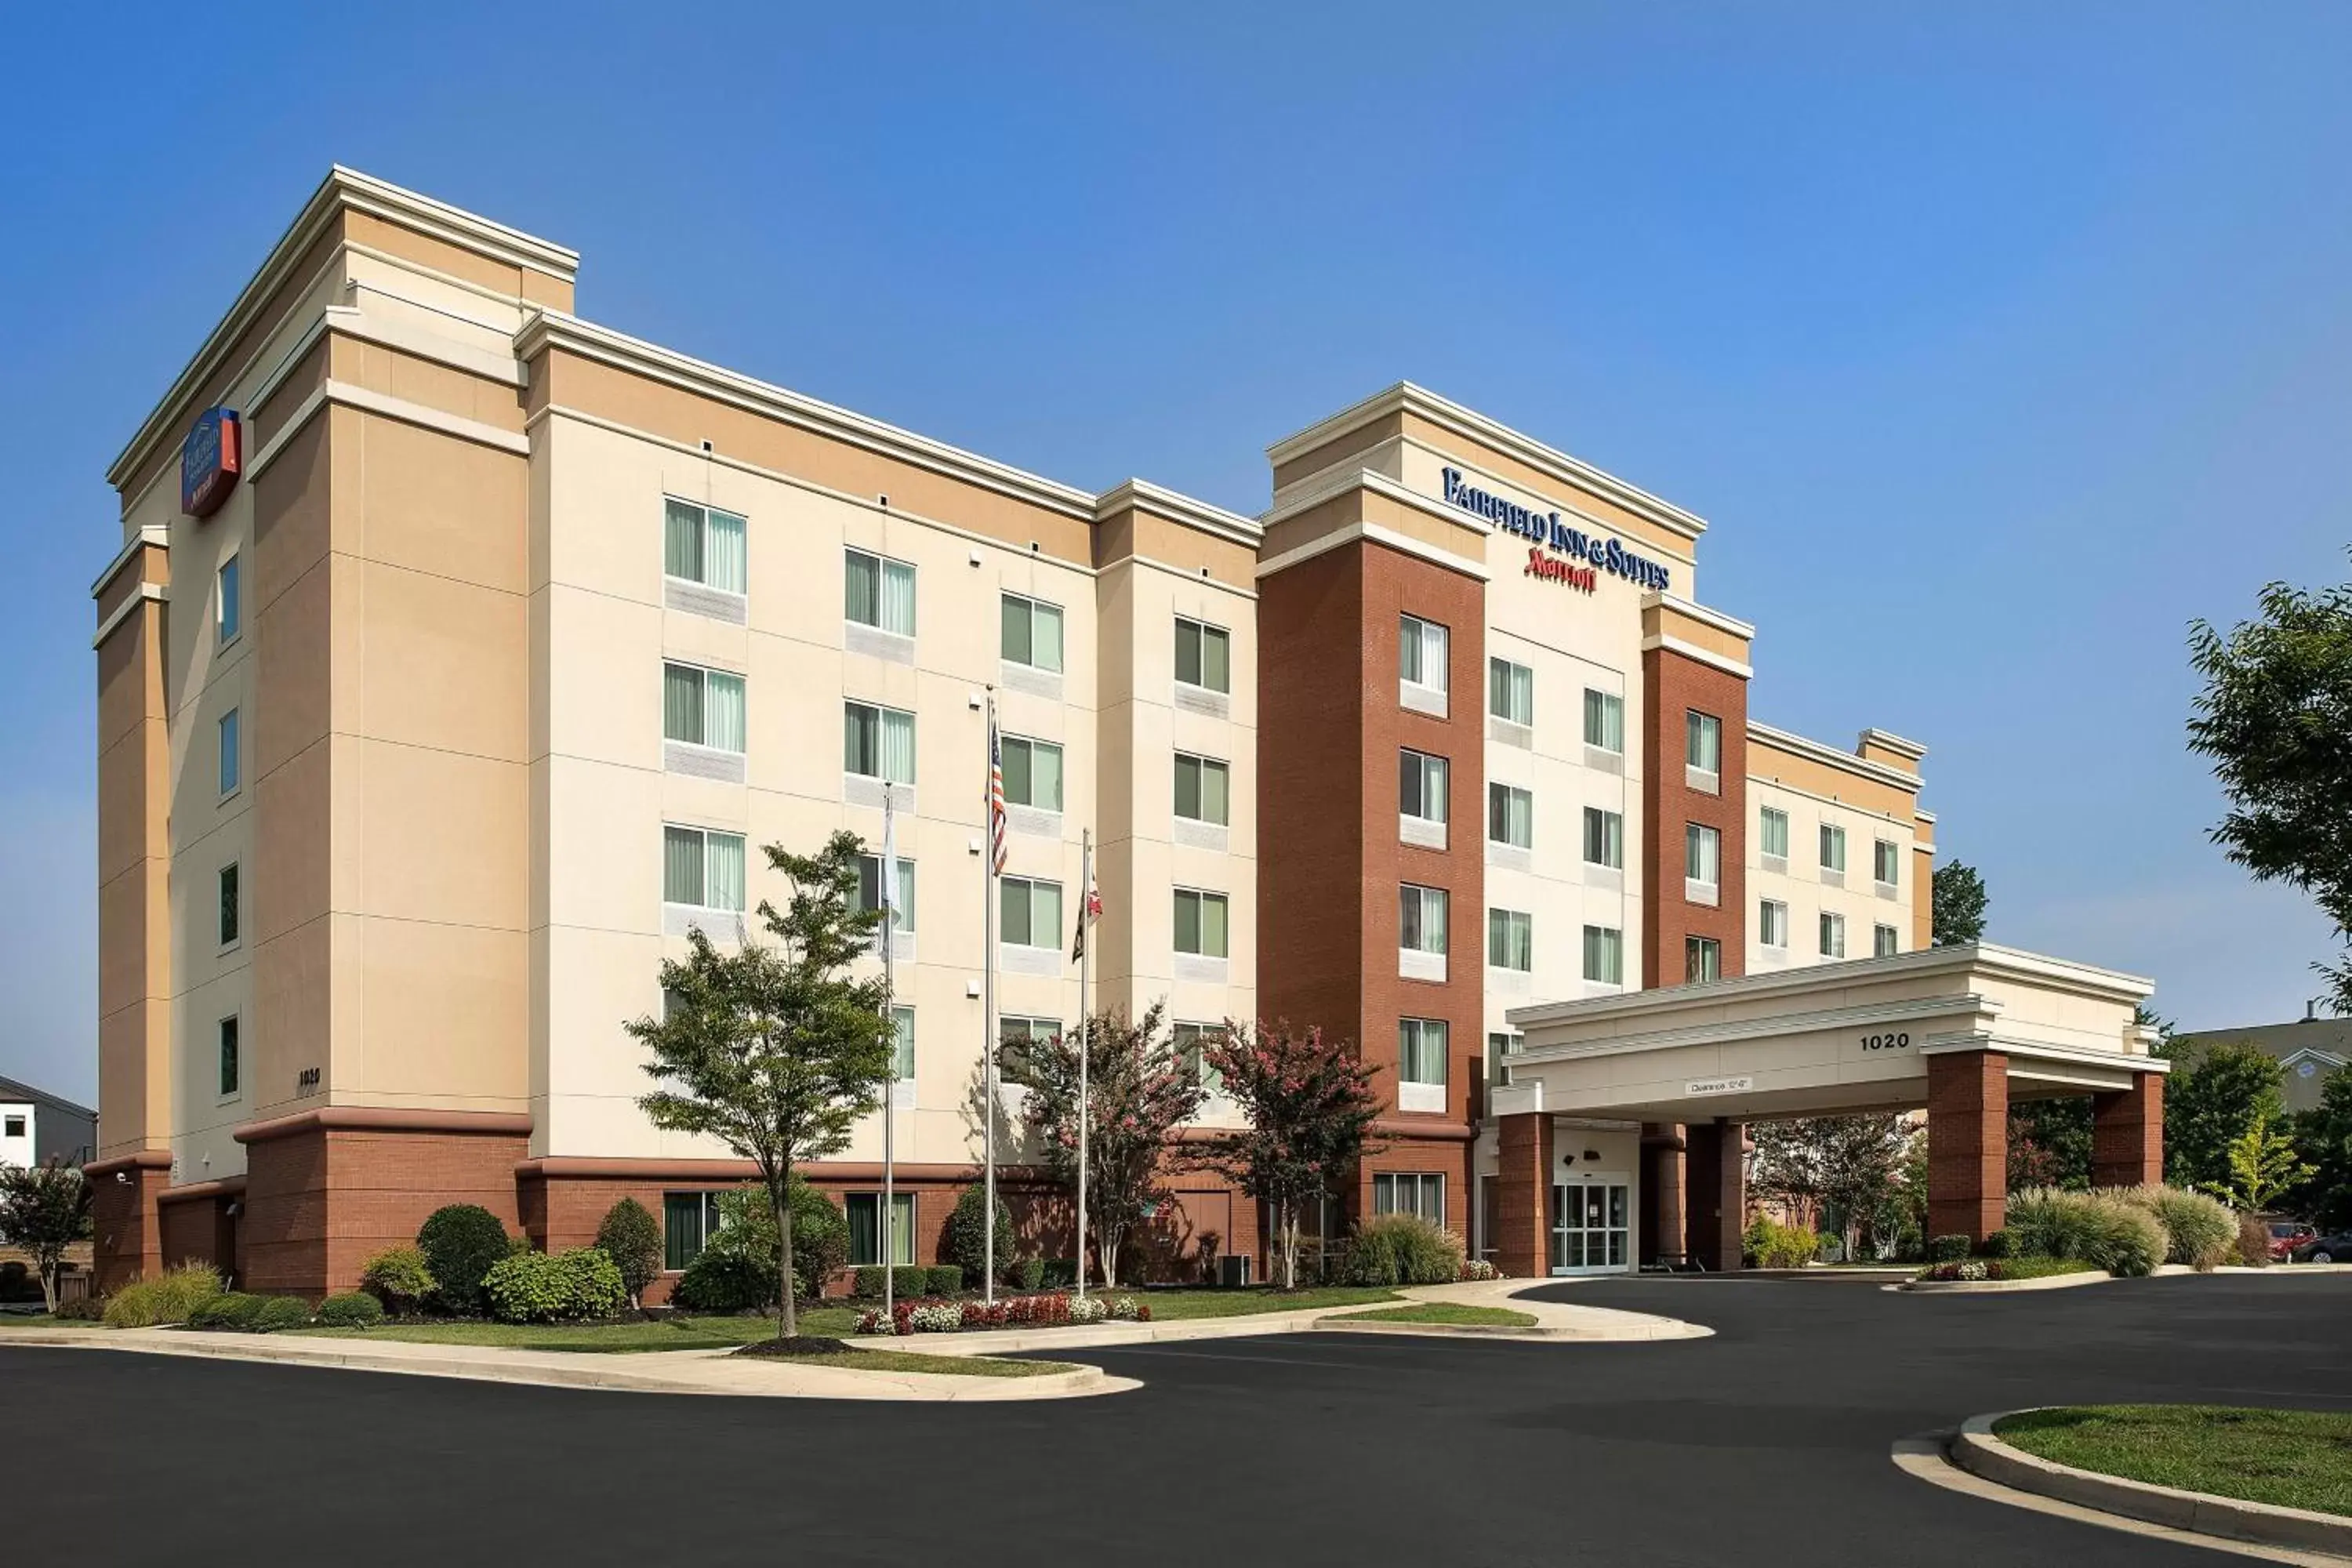 Property Building in Fairfield Inn & Suites Baltimore BWI Airport